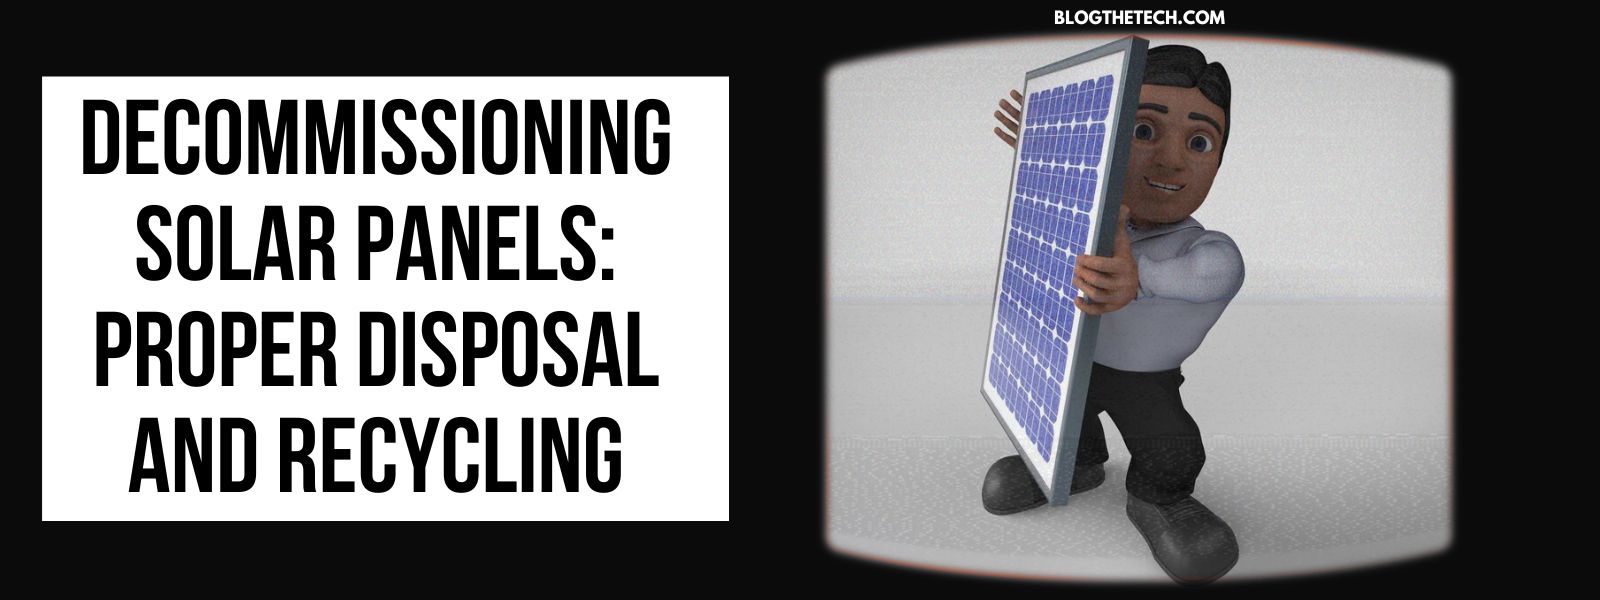 Decommissioning Solar Panels: Proper Disposal and Recycling